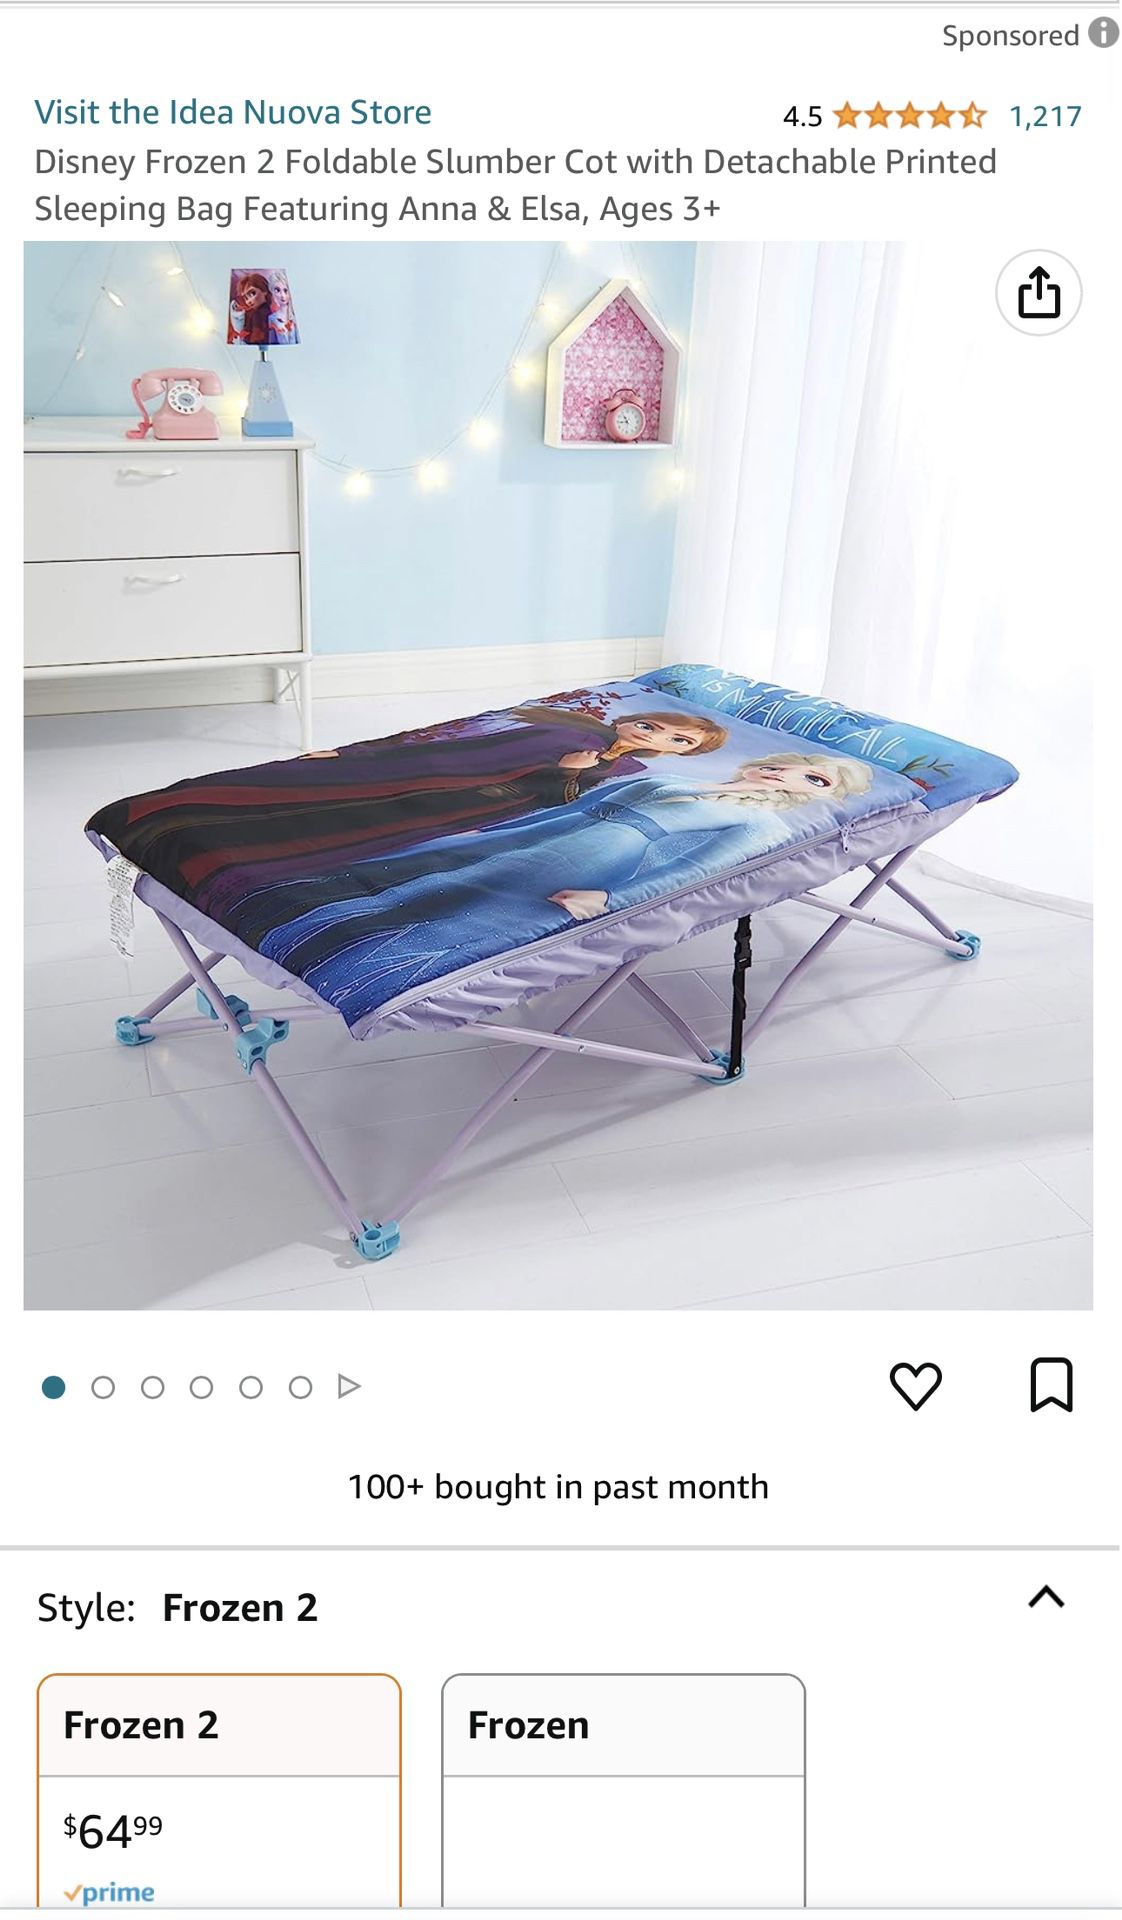 Kids Camping Cots With Zip Up Sleeping Bags